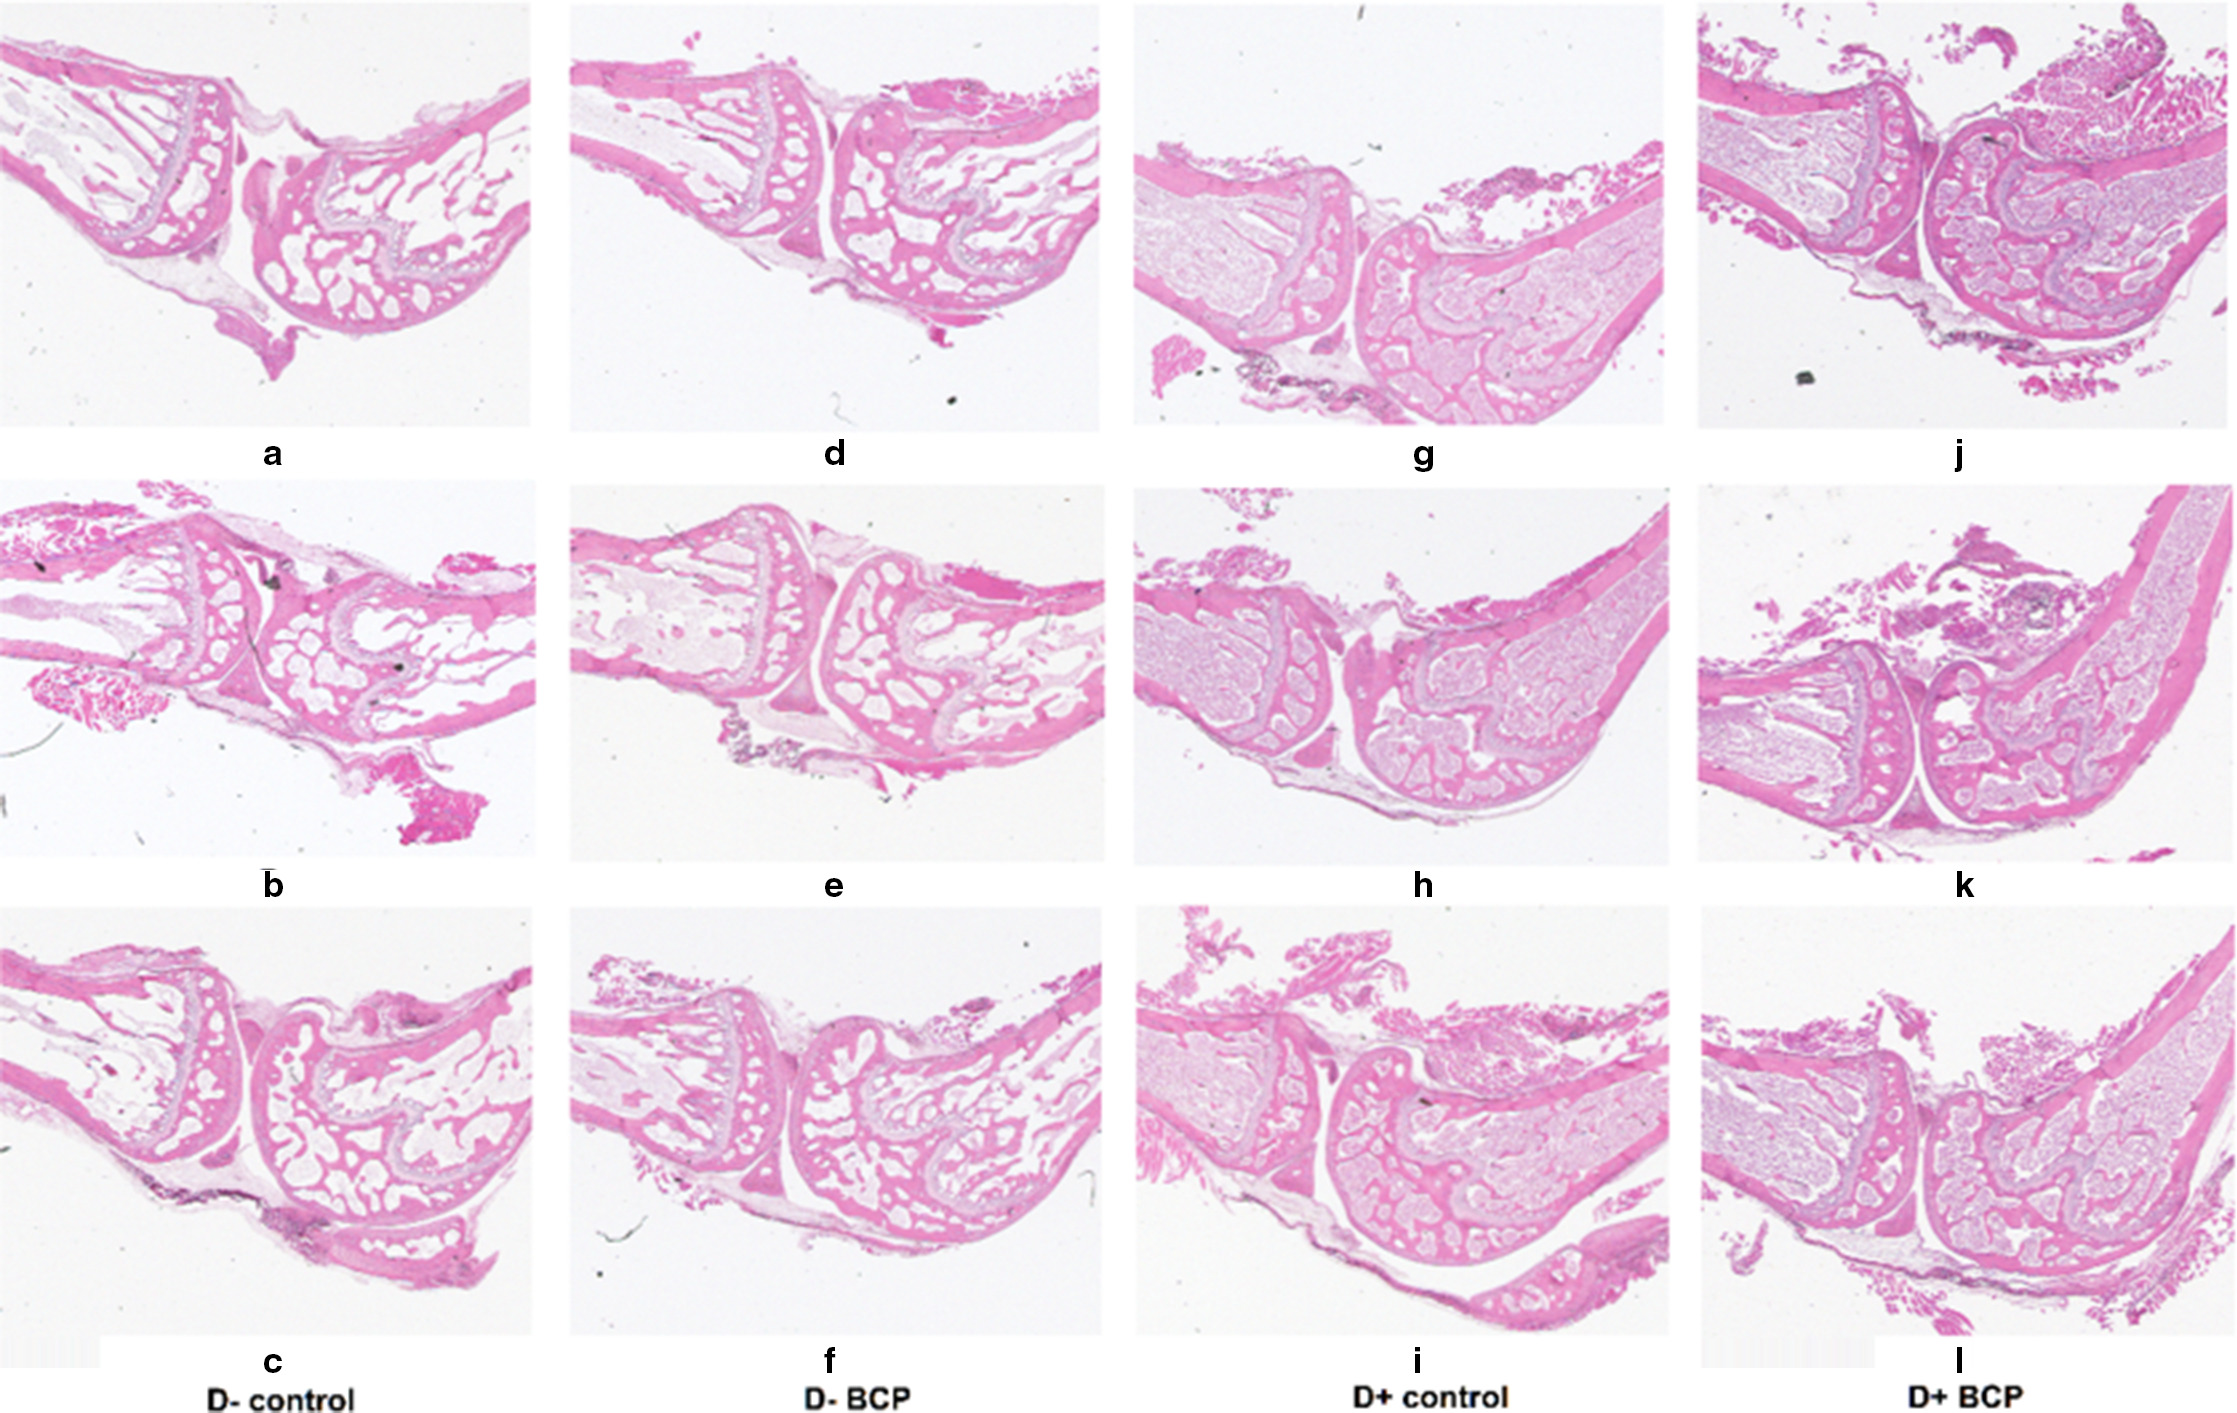 Fig. 4 
            Histopathological features of knee joint tissues in mice from different groups at the endpoint of the experiment. a) to c) Vitamin D-deficient diet (D-) control group. d) to f) D- ß-caryophyllene (BCP) group. g) to i) Standard vitamin D-sufficient diet (D+) control group. j) to l) D+ BCP group.
          